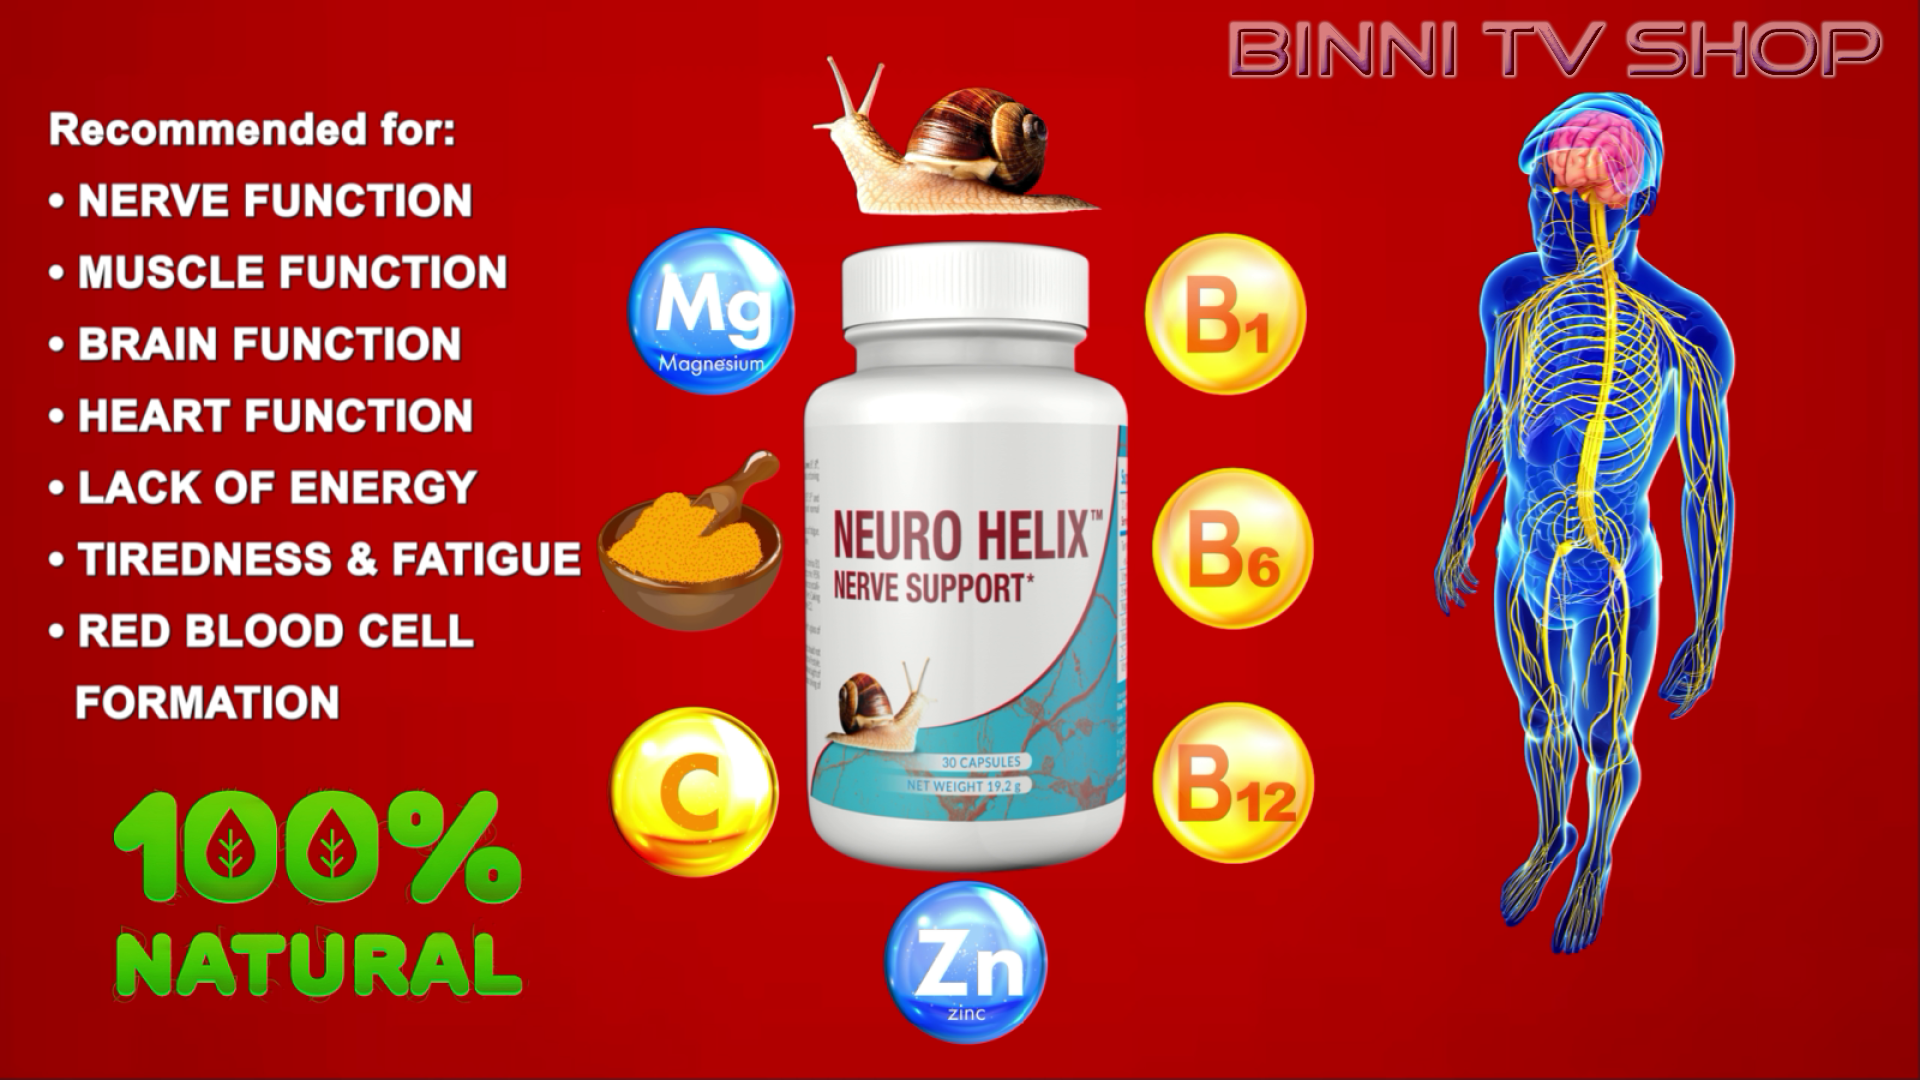 Neuro Helix Nerve Support Supplement Capsules with Snail Extract, B Vitamins, Magnesium, Zinc and Curcumin